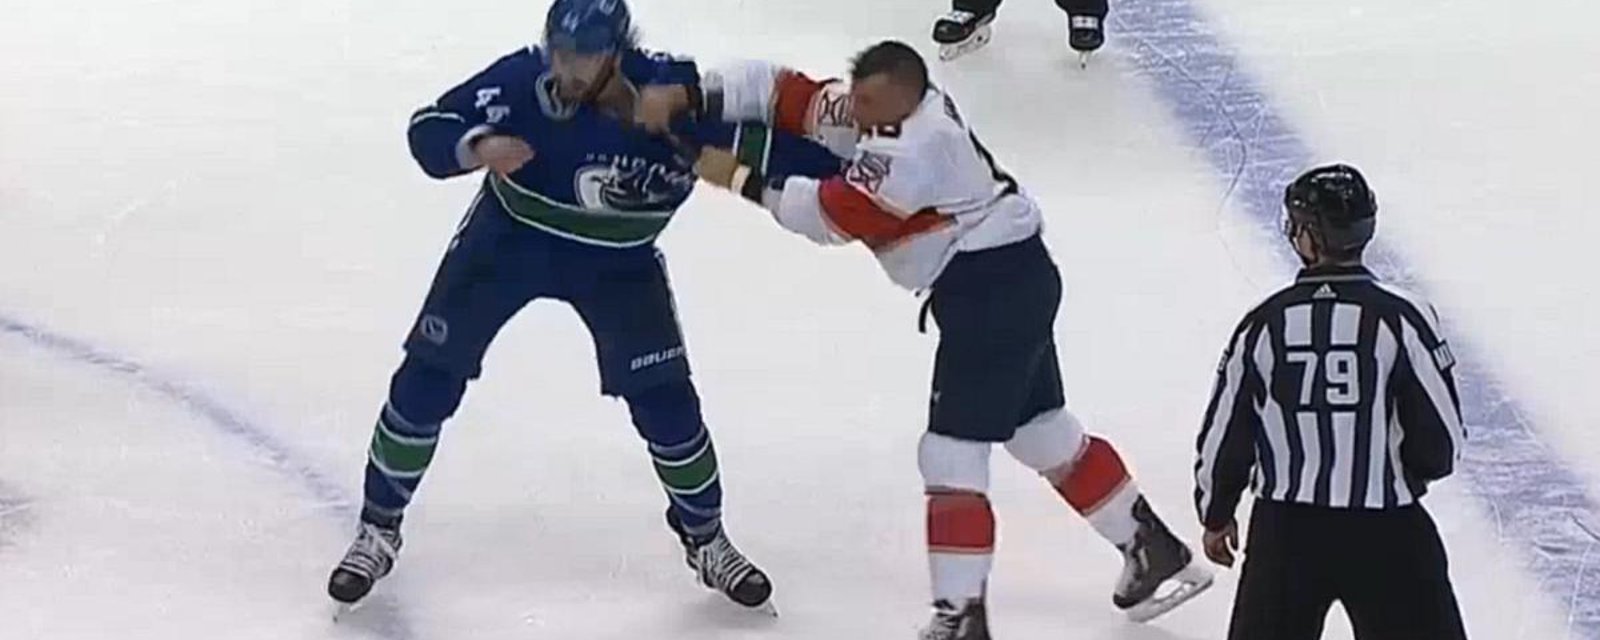 Gudbranson and Haley go back and forth in spirited fight.